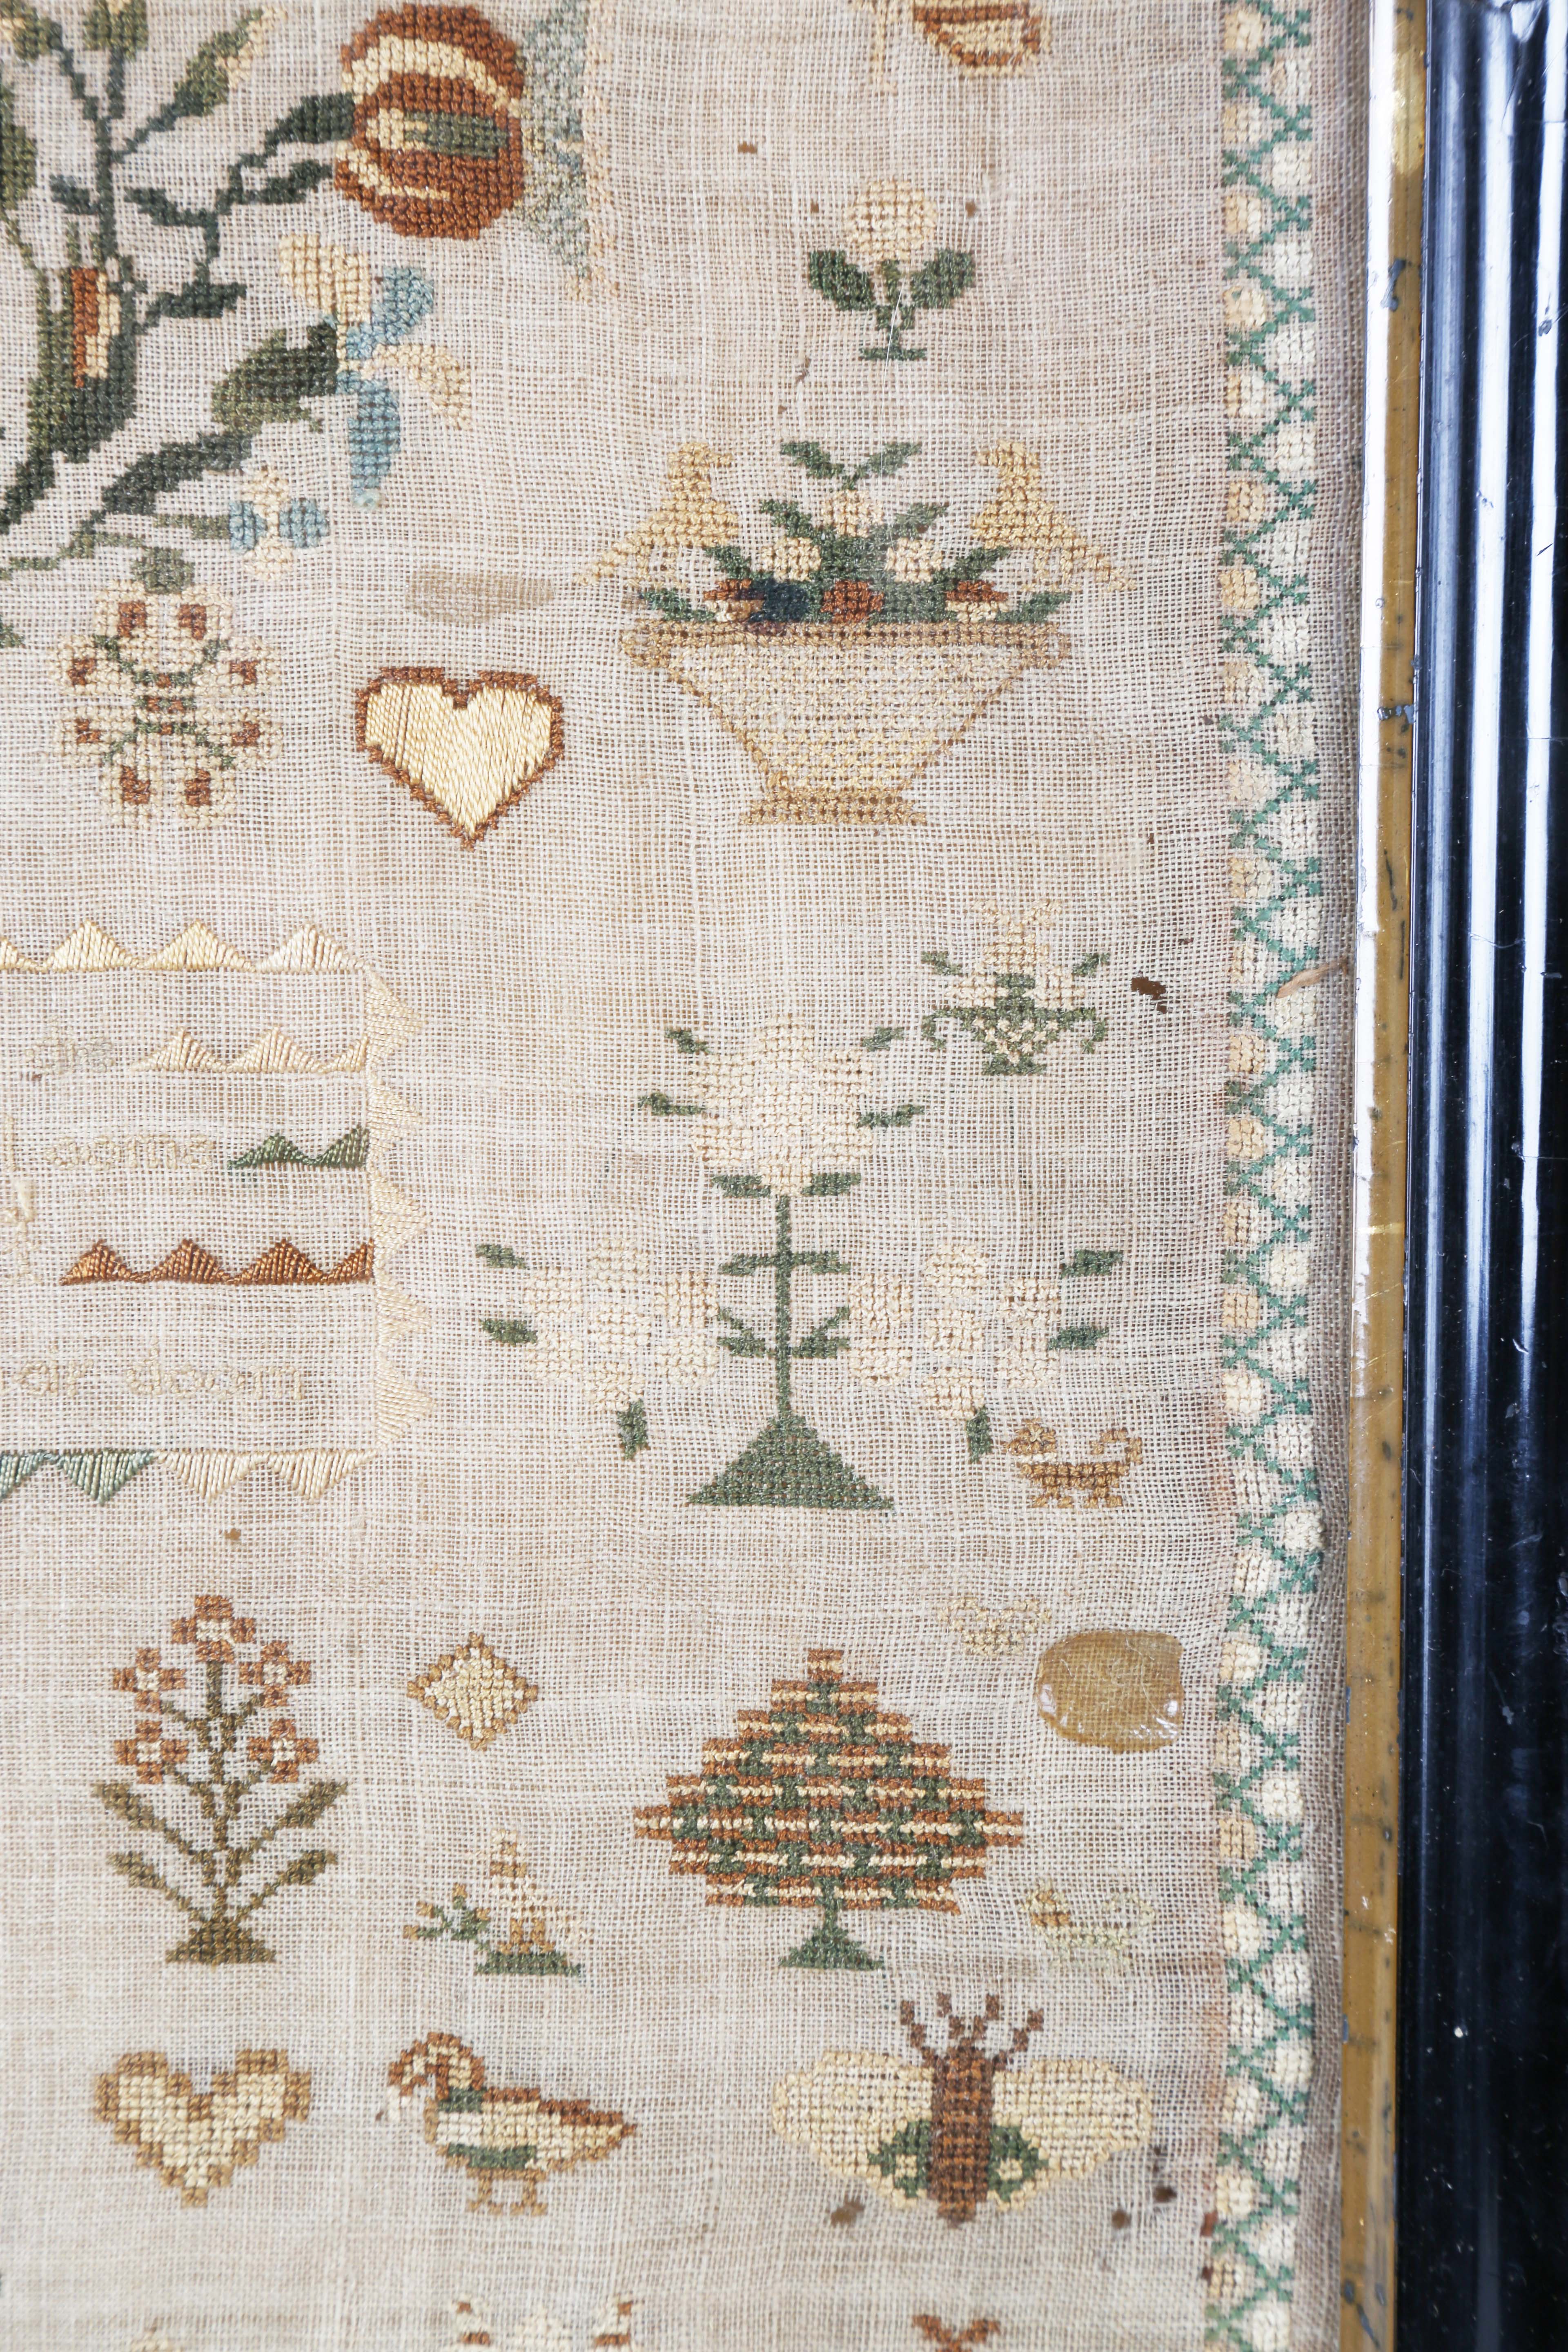 An early Victorian needlework sampler by Jane Constance, aged 13, dated 'January 6 1839', finely - Image 7 of 14